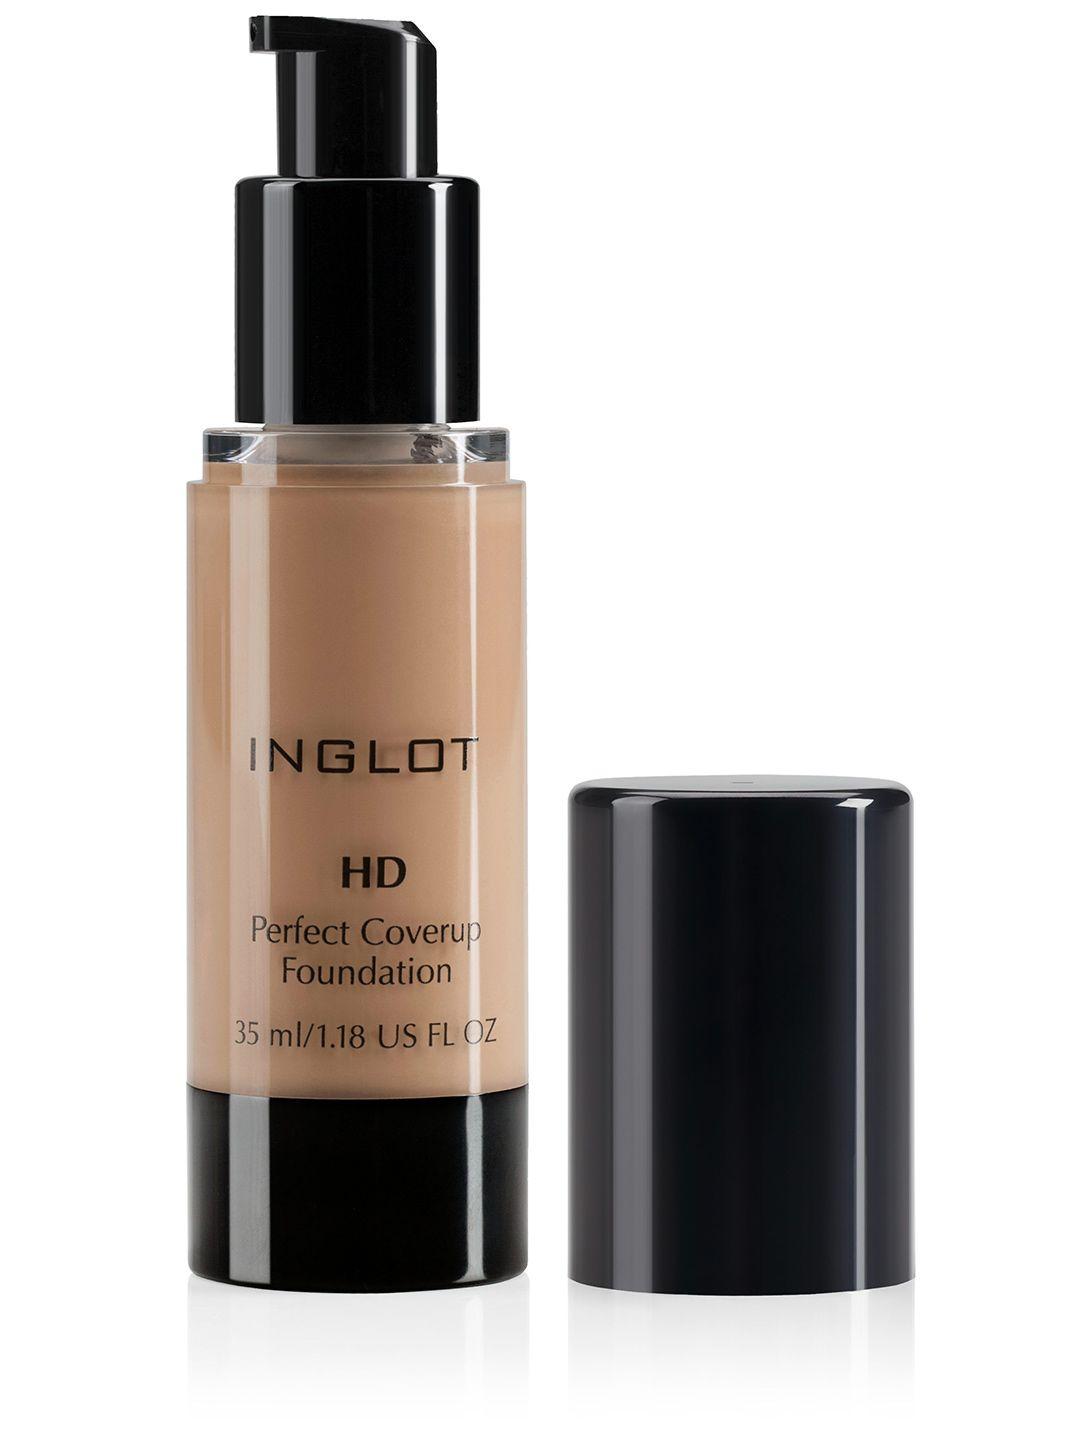 inglot hd perfection coverup foundation 35ml - nude 81